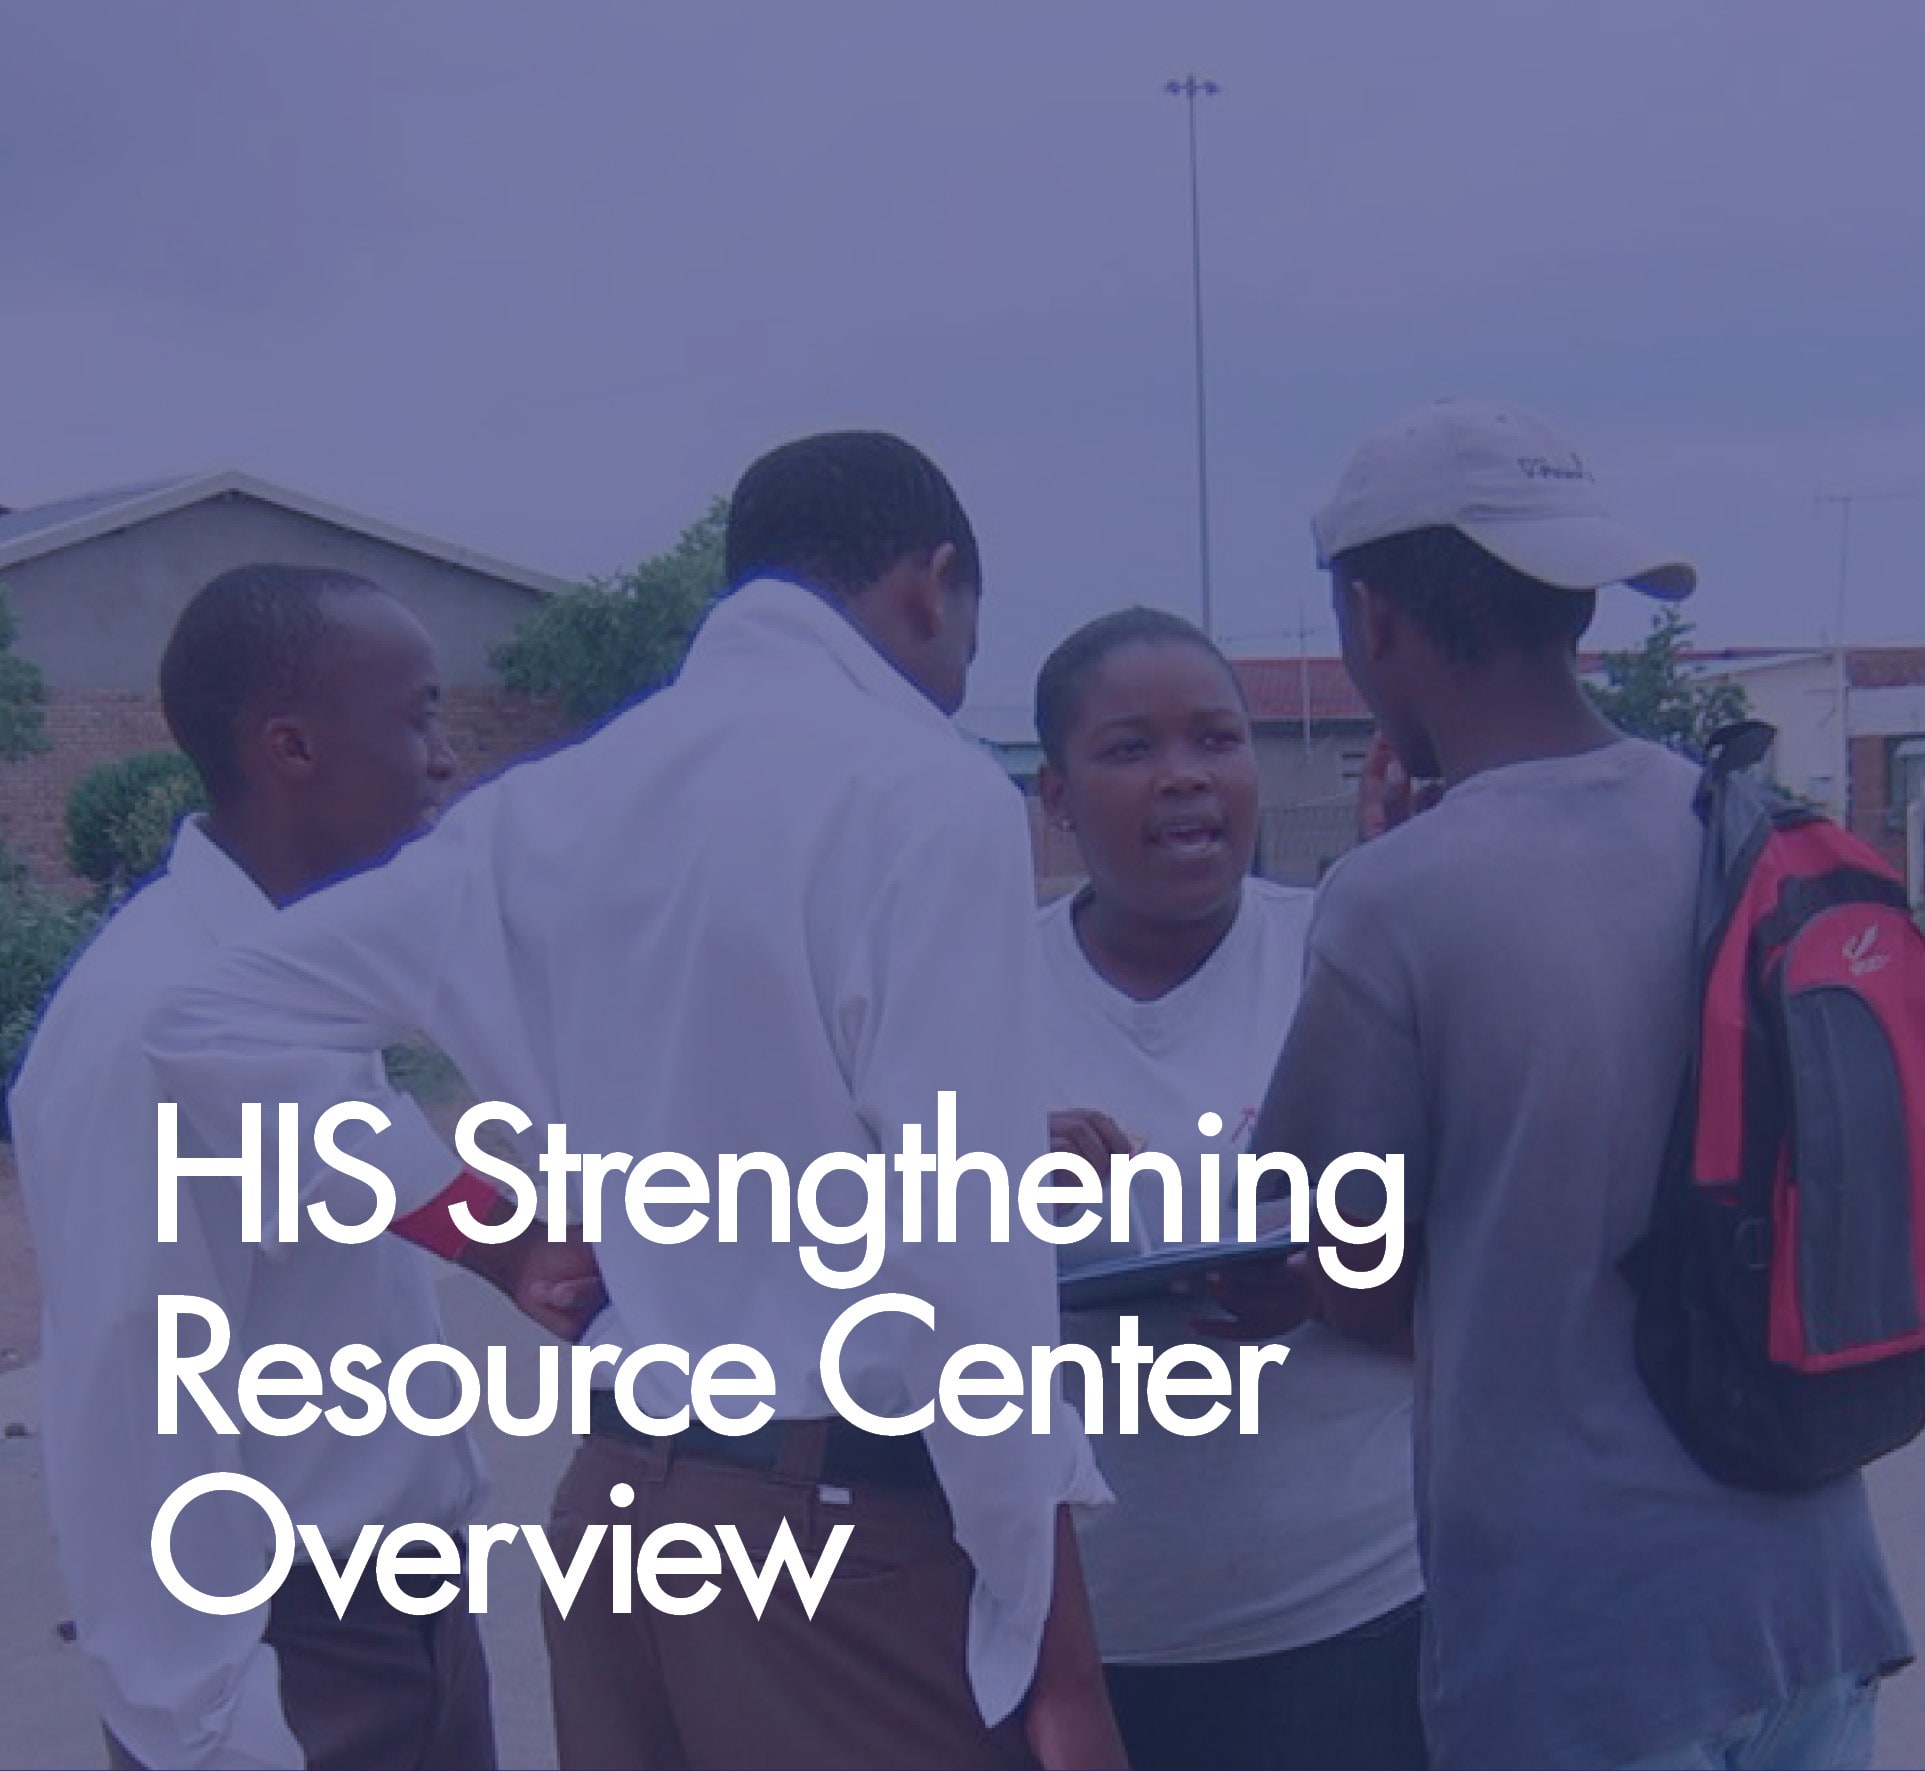 HIS Strengthening Resource Center Overview